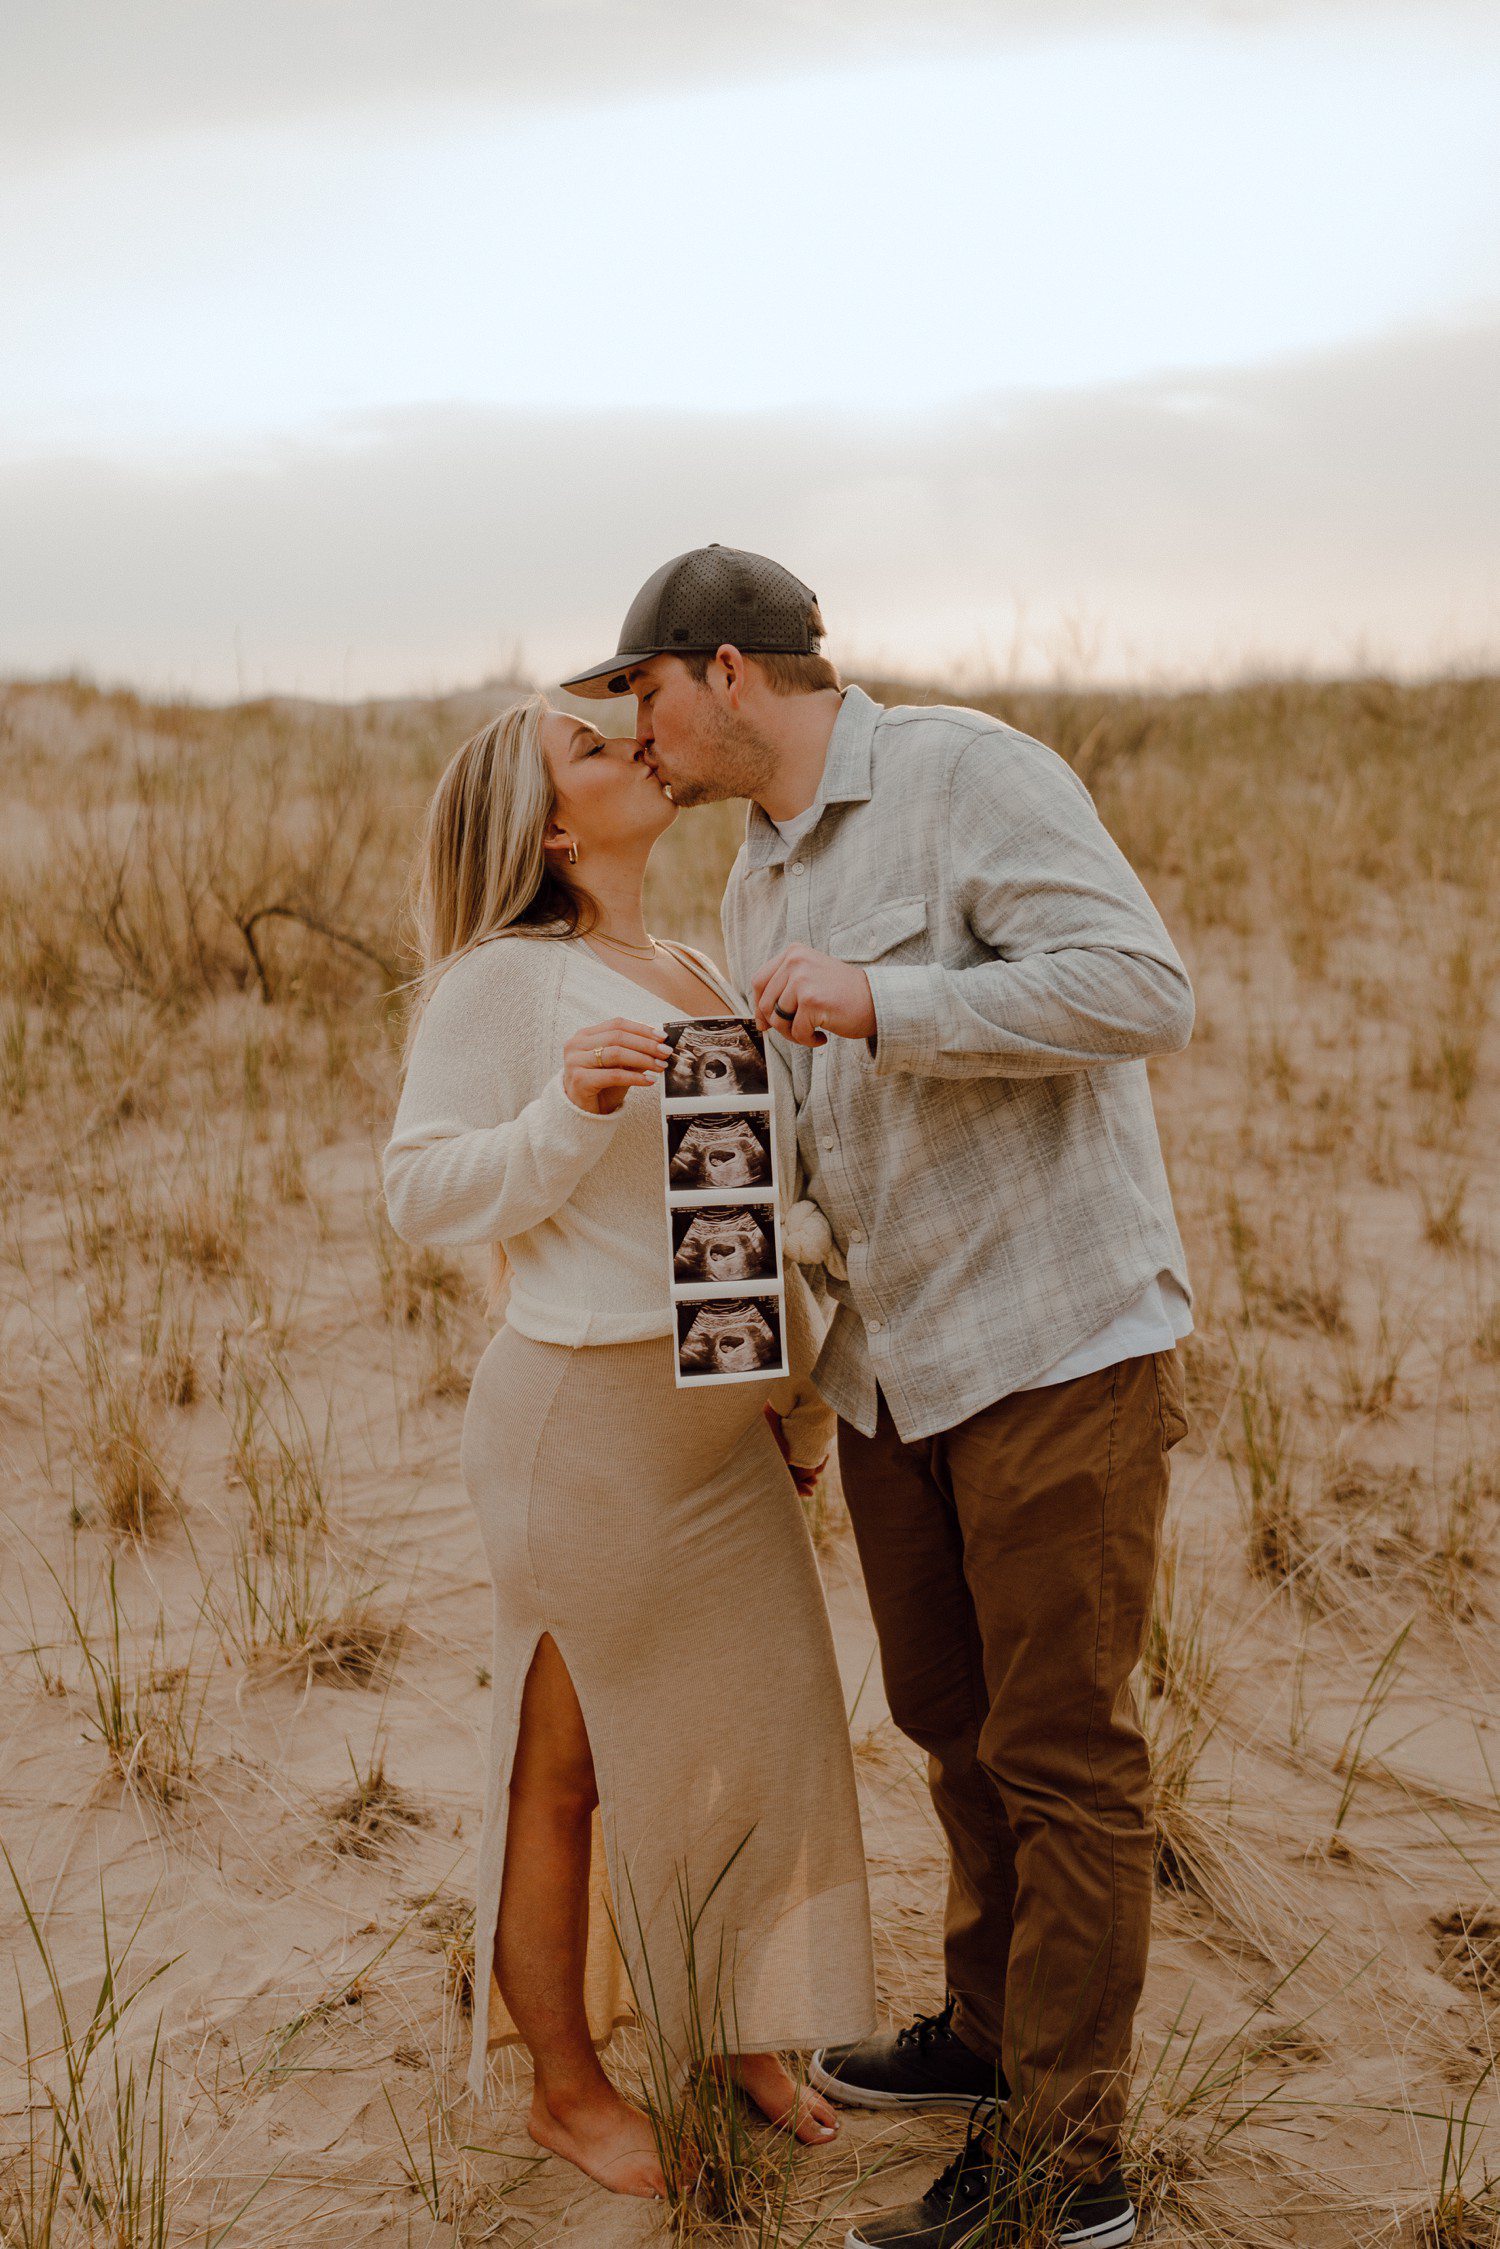 pregnancy announcement photos on the beach with sonogram